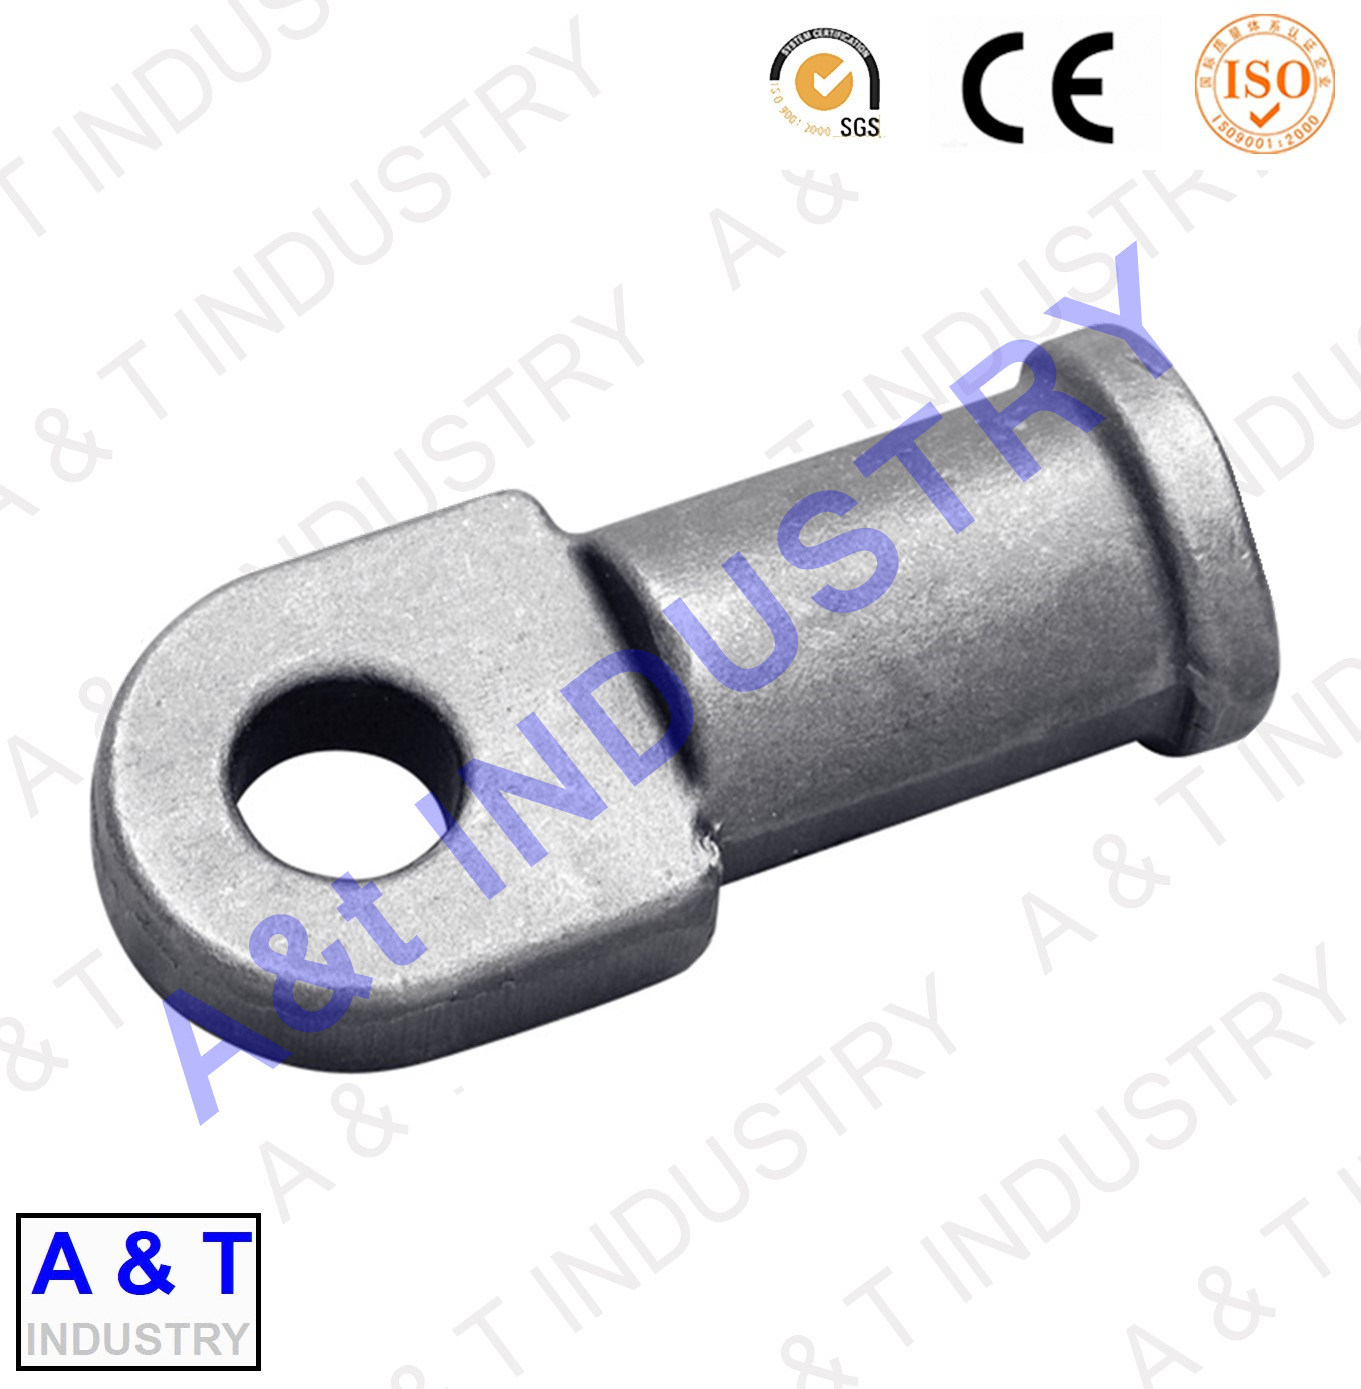 Electric Power Fittings, Overhead Line Fittings, Forging Part